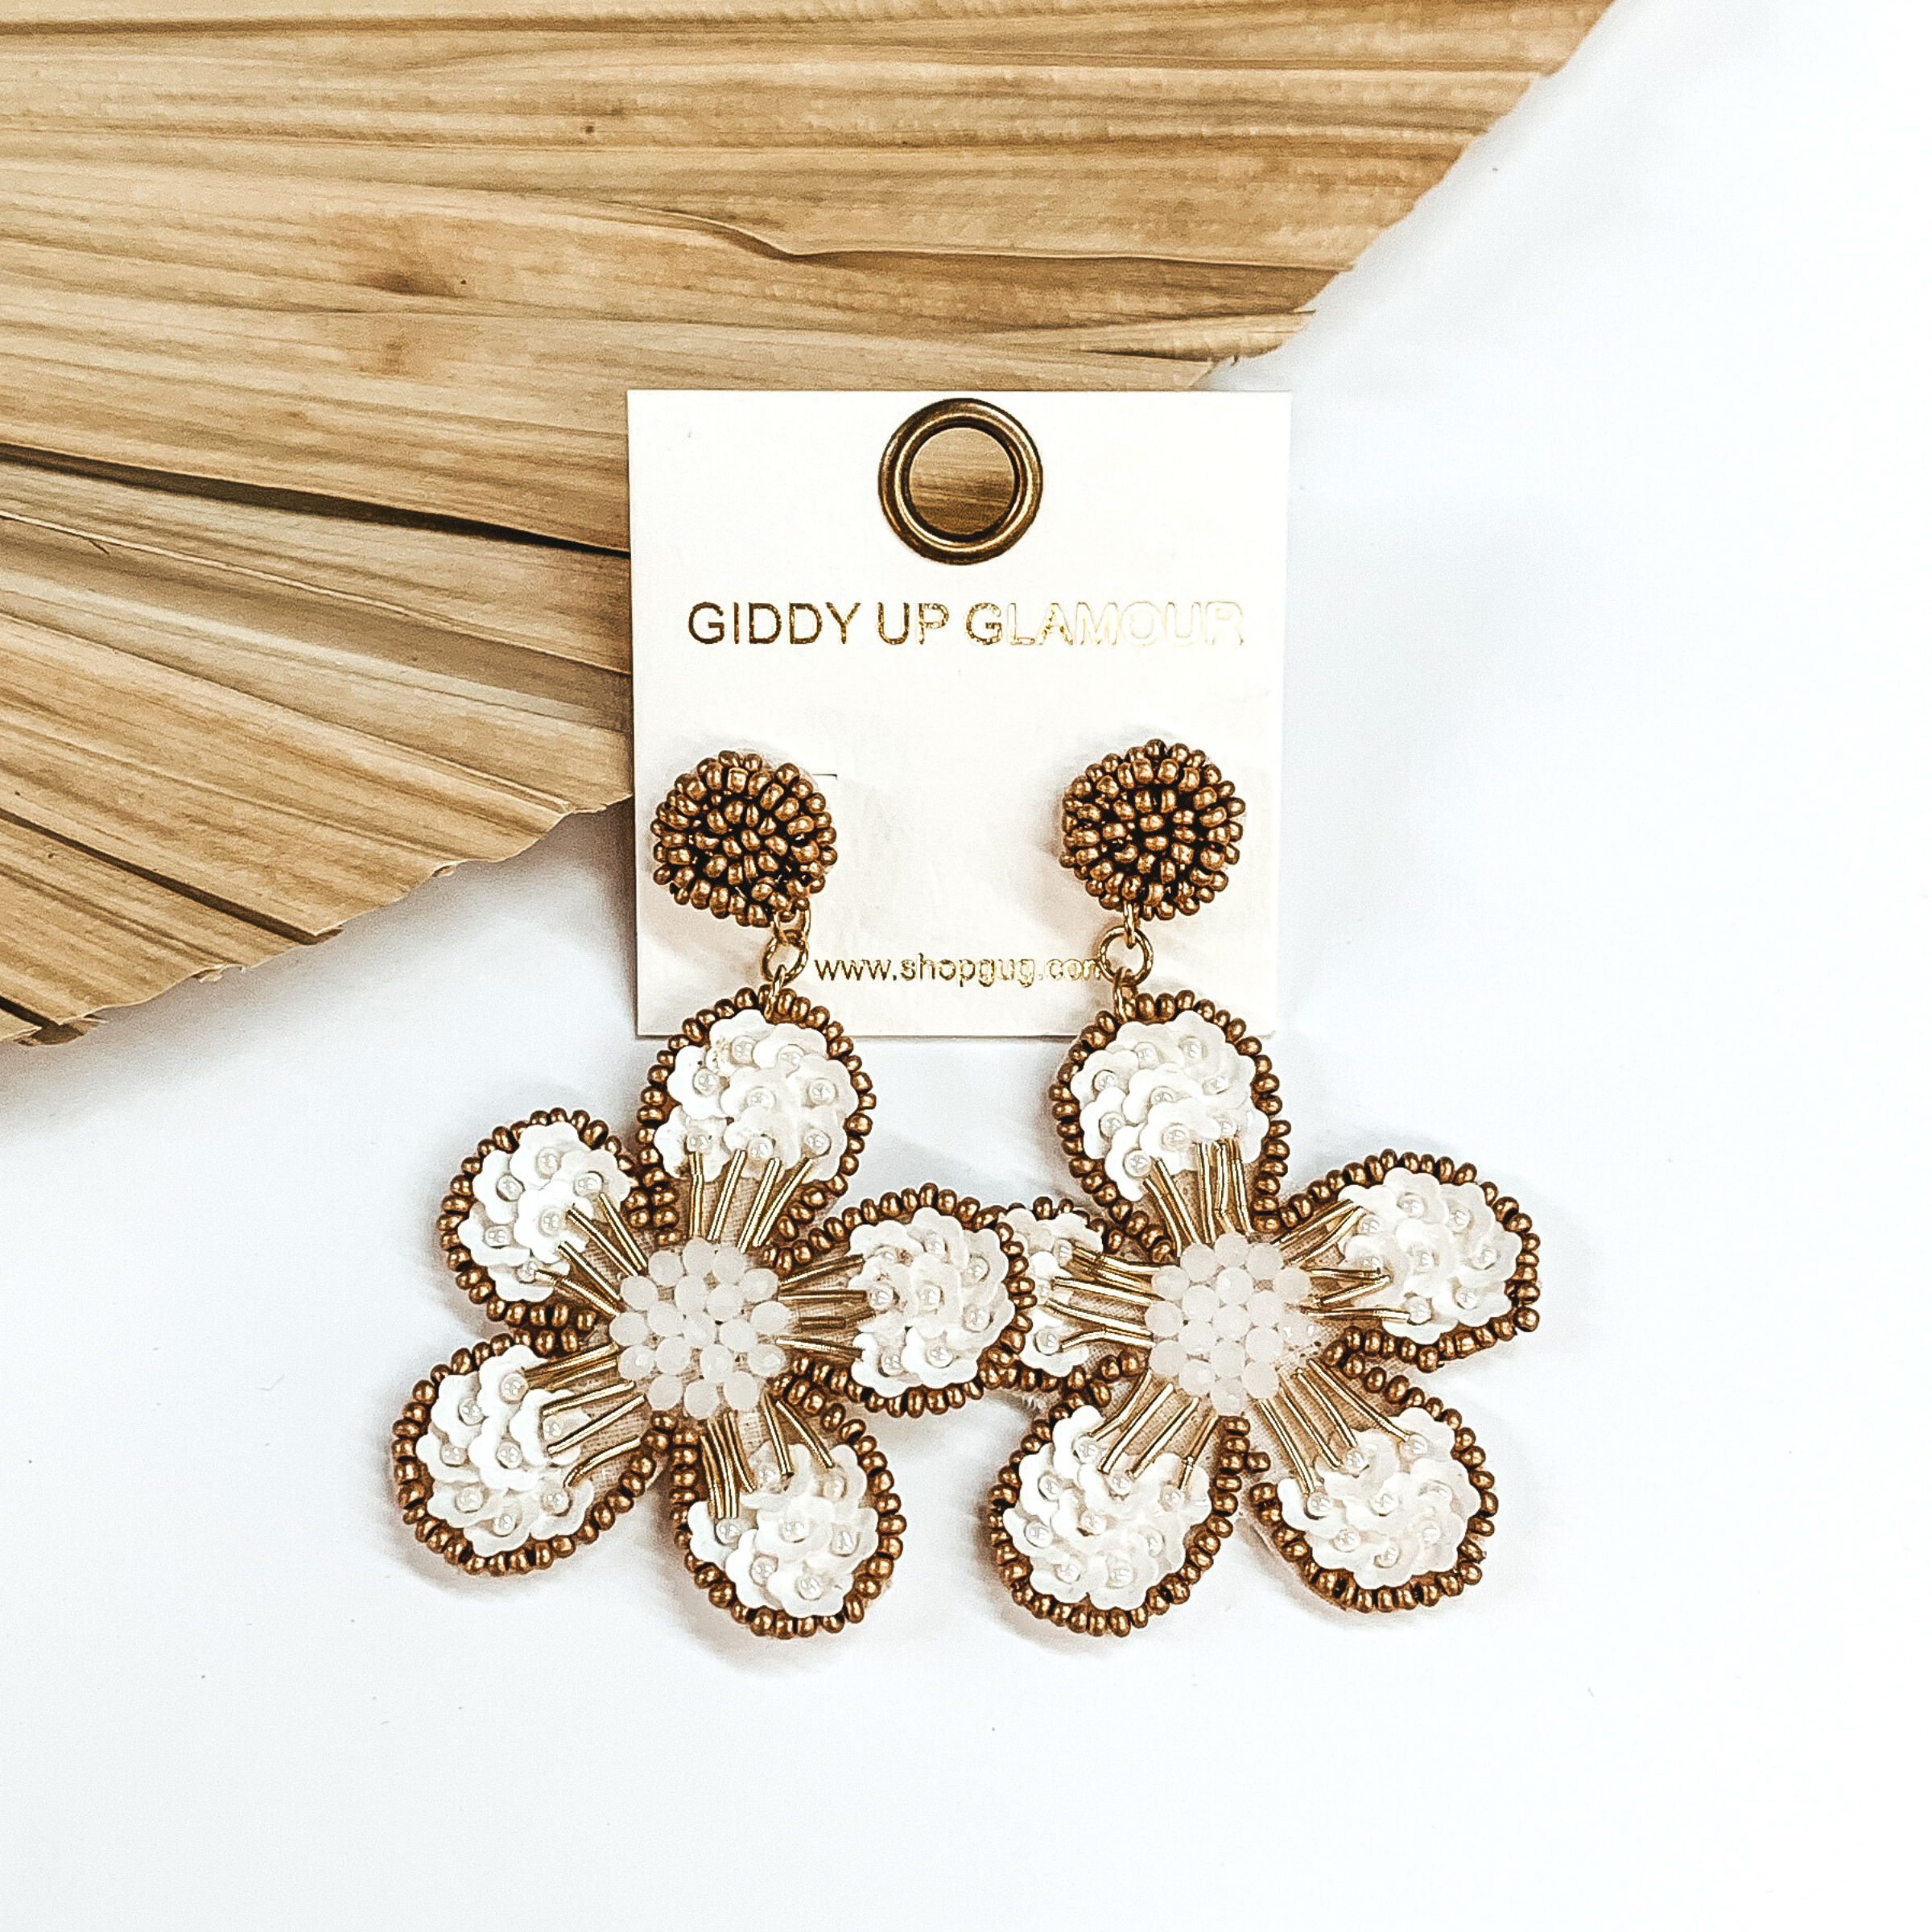 Gold beaded circle post back earrings. There is a hanging beaded flower pendant from the gold stud earrings. The flower pendant is white with a gold outline and detailing. These earrings are pictured on a white background with a dried palm leaf in the background. 